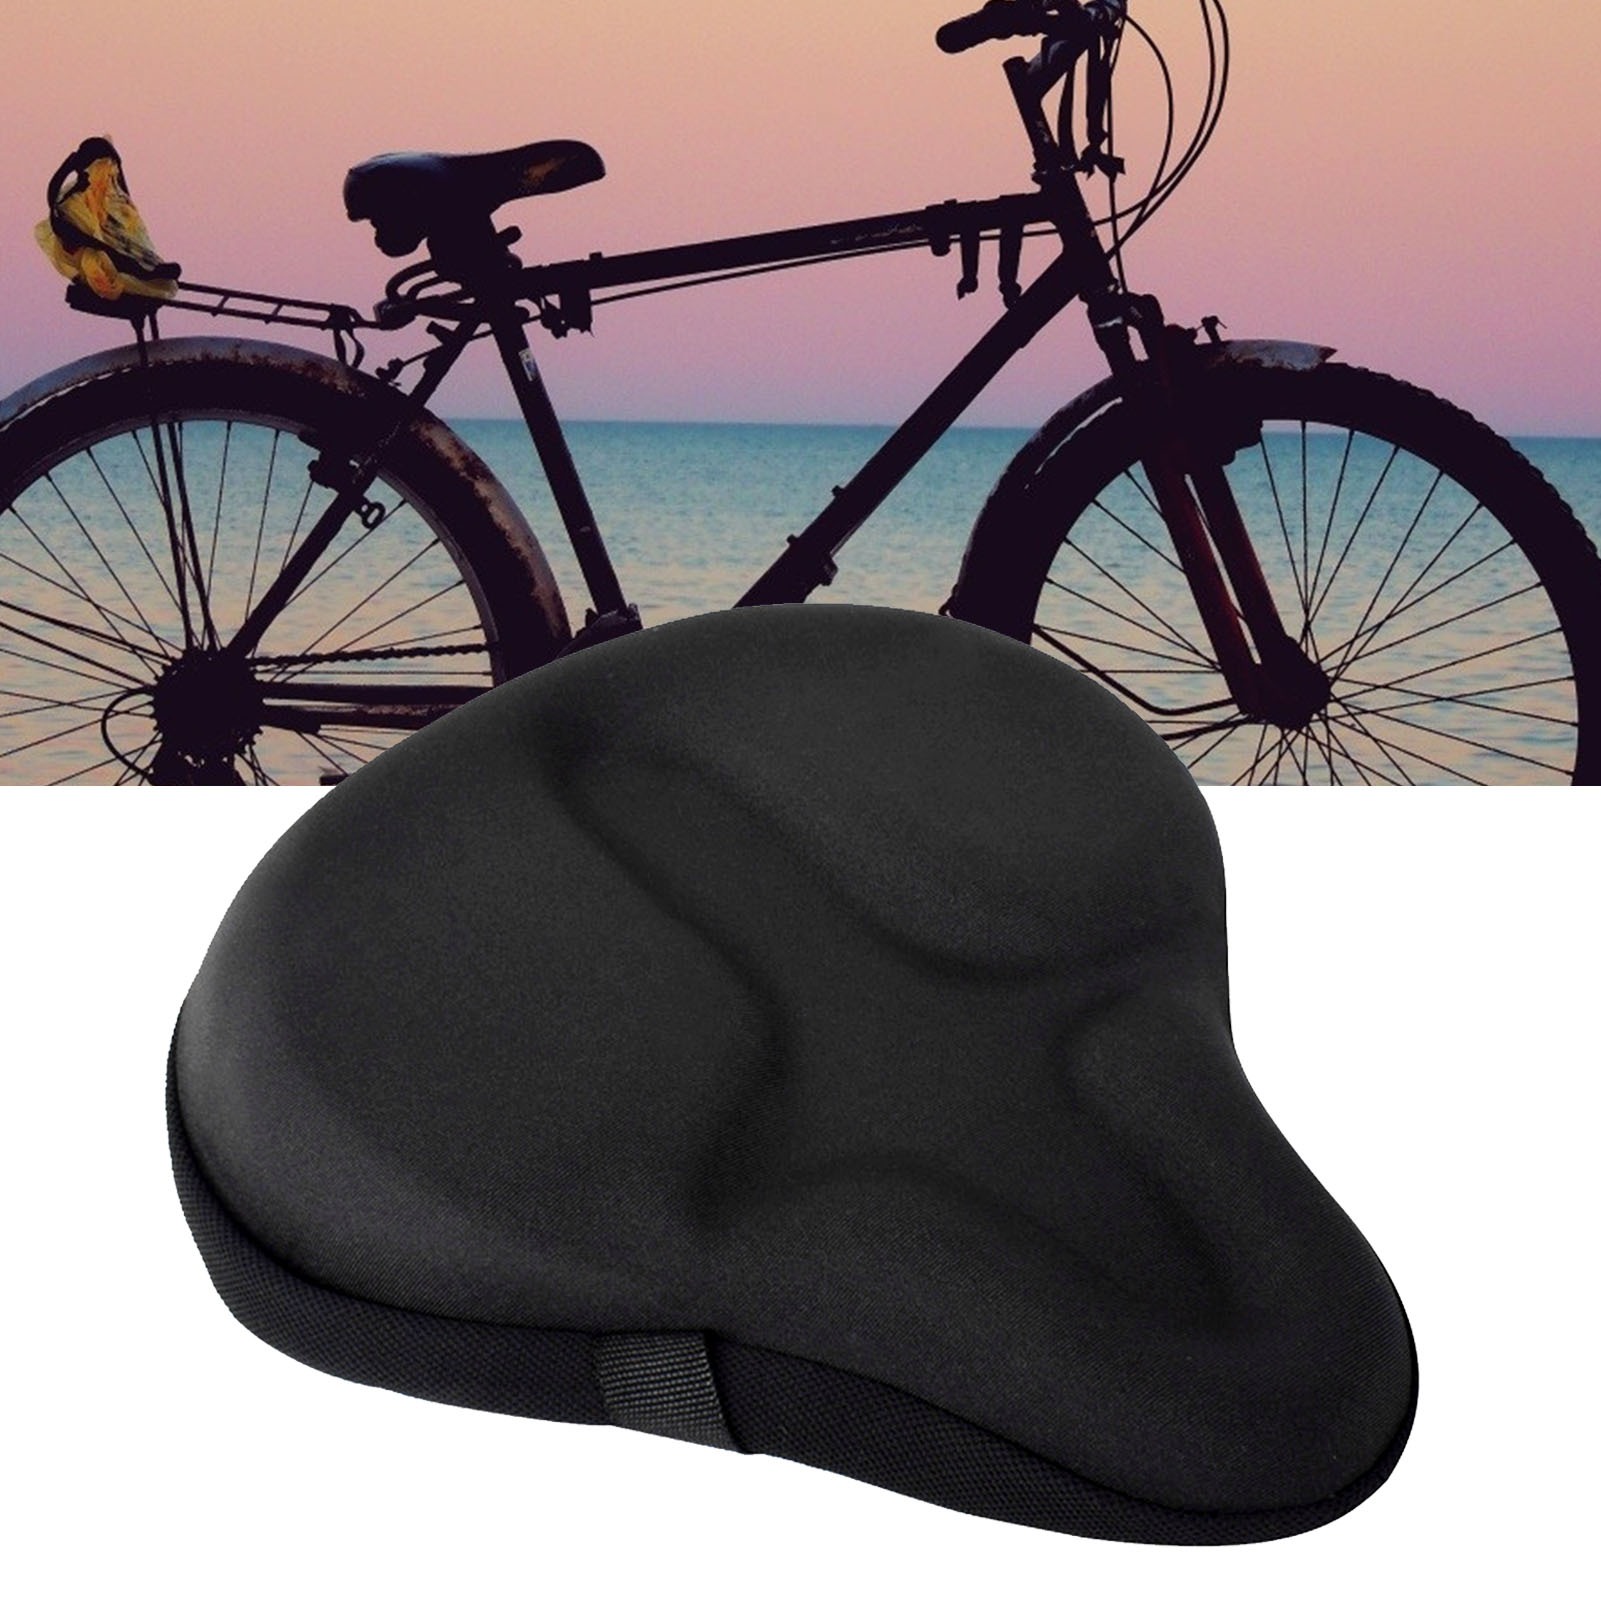 Bicycle Seat Saddle Cover Cycling Bike Silicone Pad Gel Cushion Adjustable US 